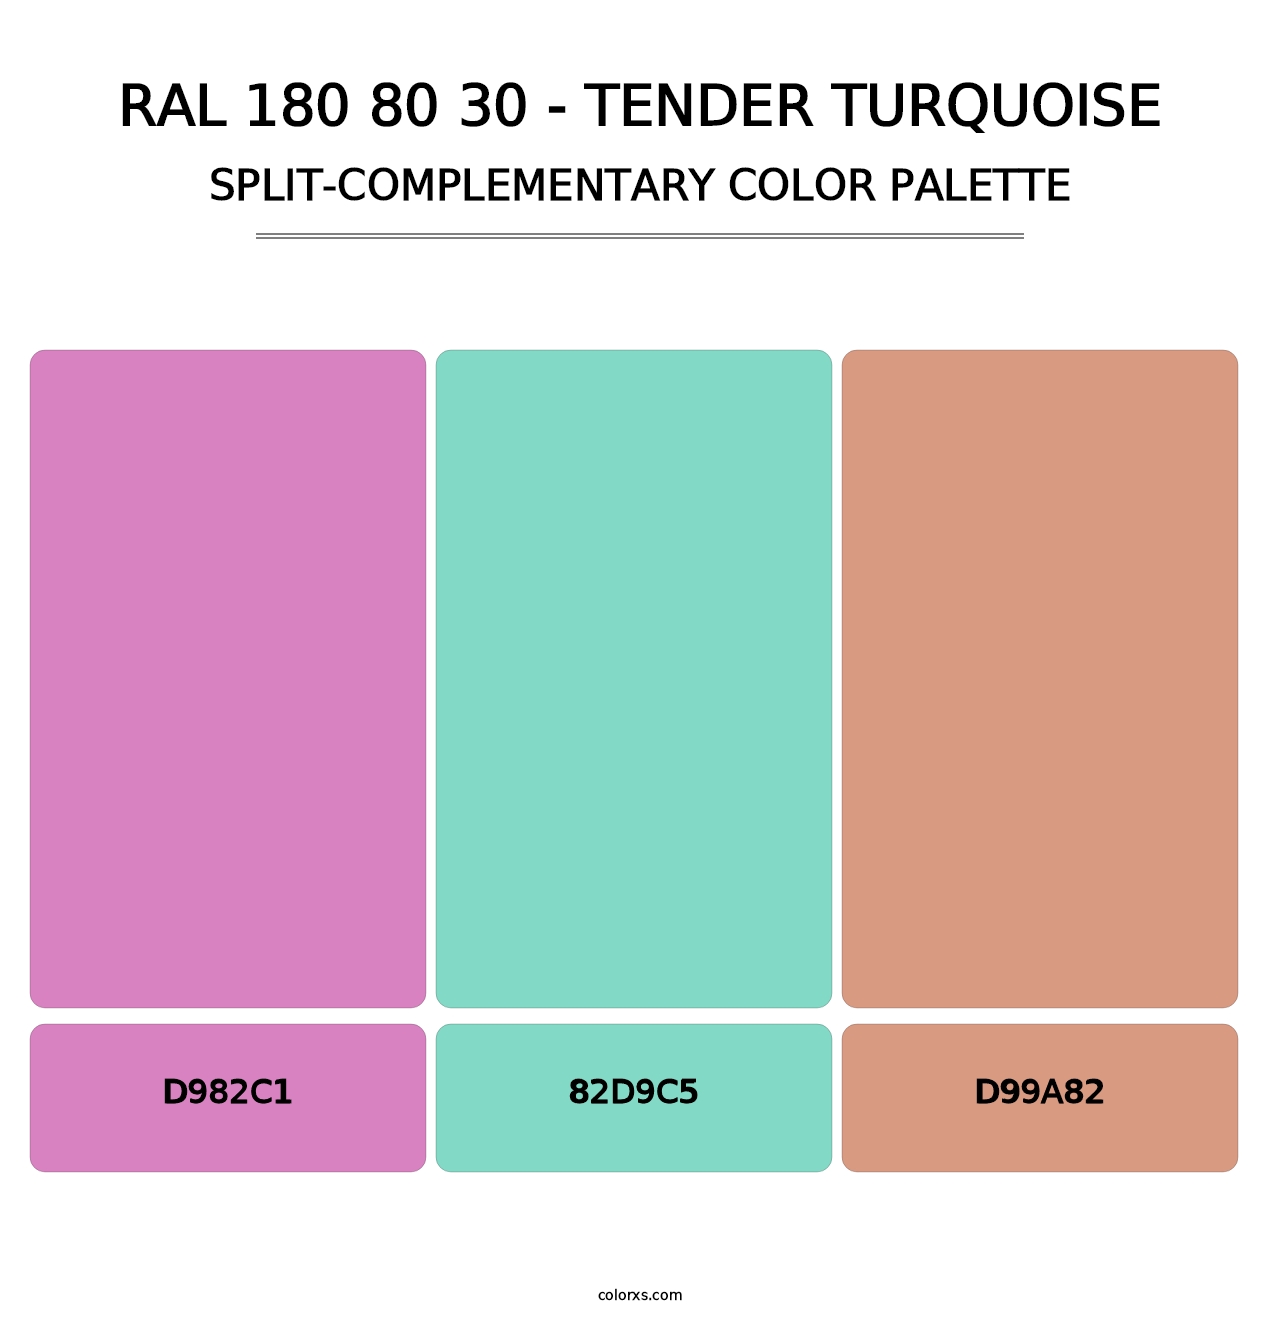 RAL 180 80 30 - Tender Turquoise - Split-Complementary Color Palette